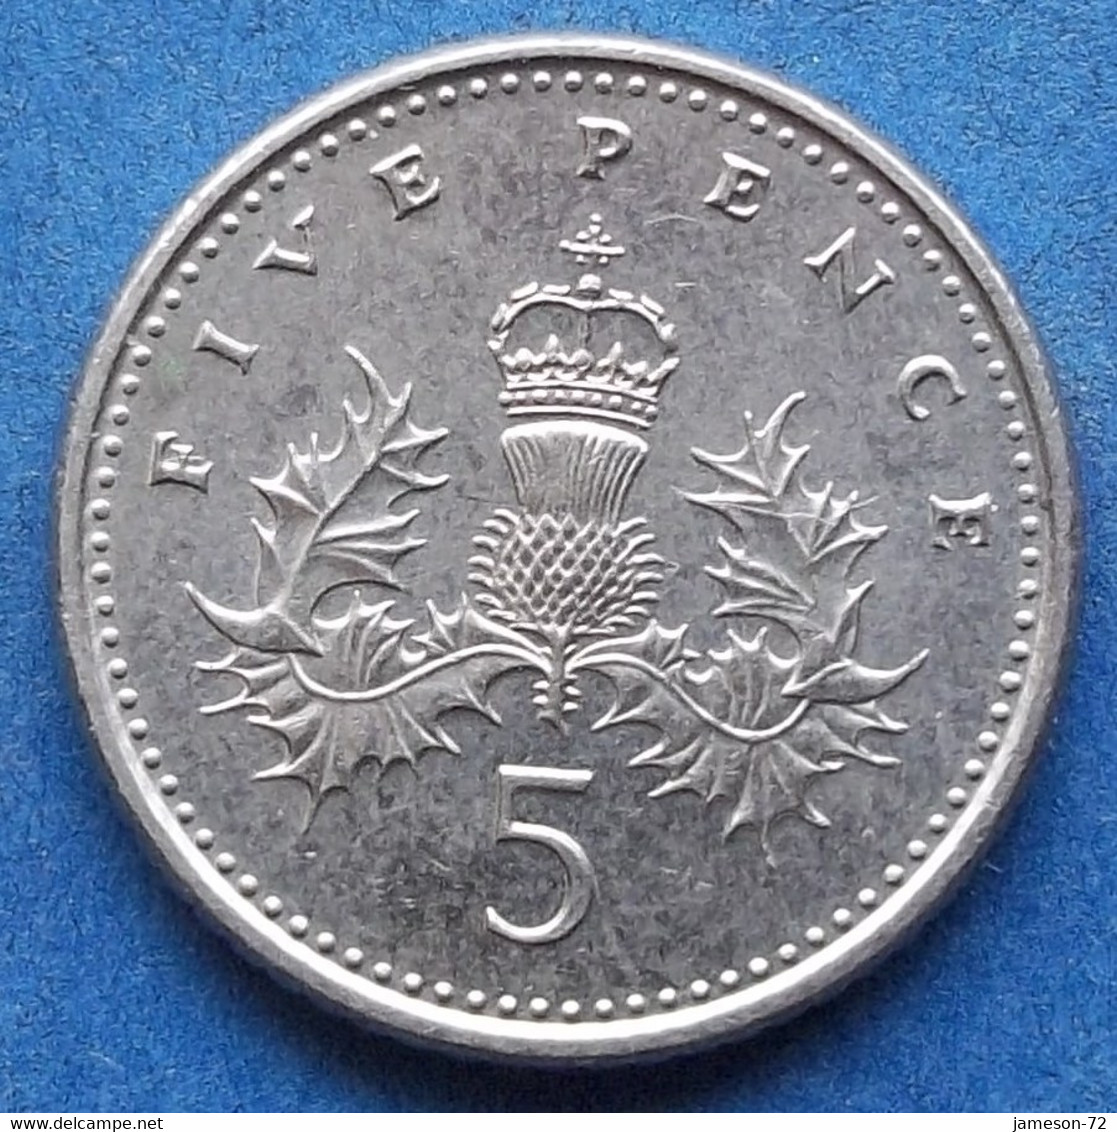 UK - 5 Pence 1990 KM# 937b Elizabeth II Decimal Coinage (1971) - Edelweiss Coins - 5 Pence & 5 New Pence